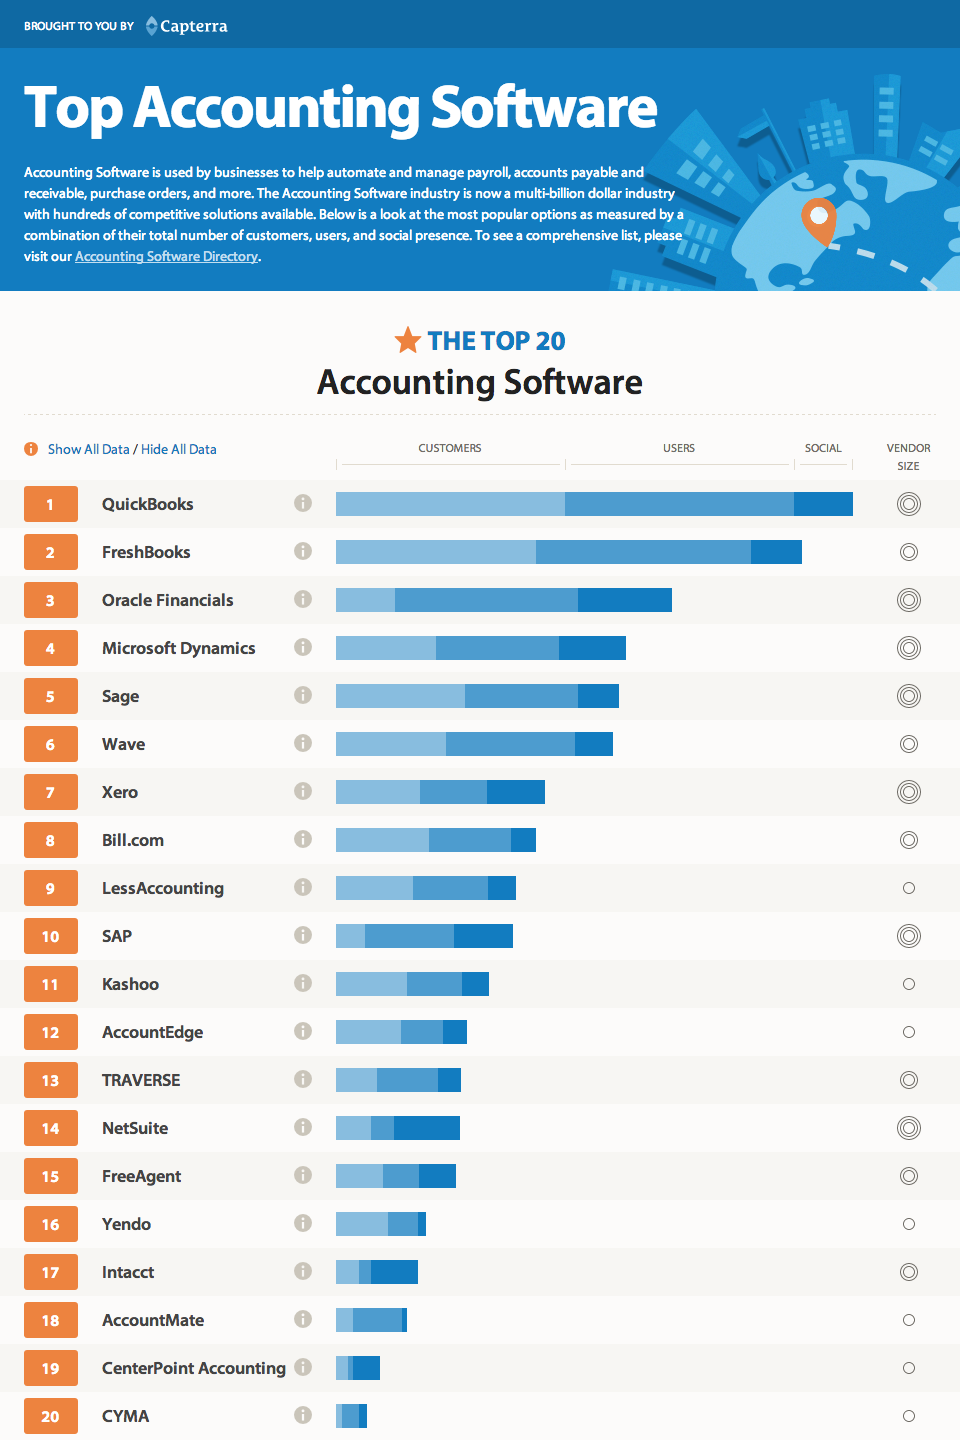 Capterra Reveals the Top 20 Accounting Software Solutions